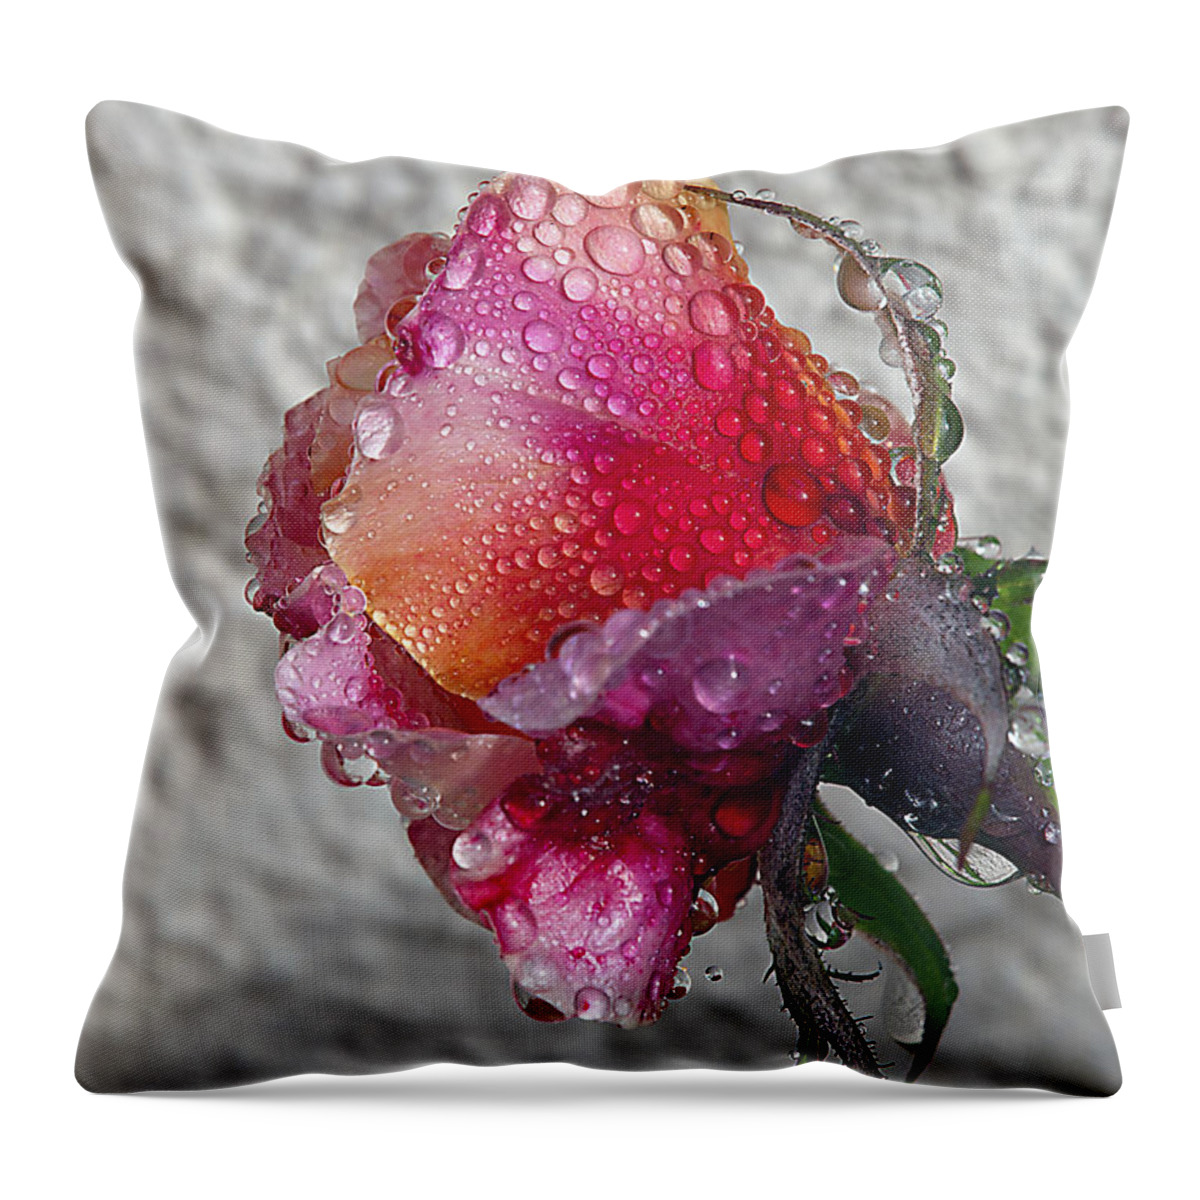 Roses Throw Pillow featuring the photograph Olde English by Joe Schofield